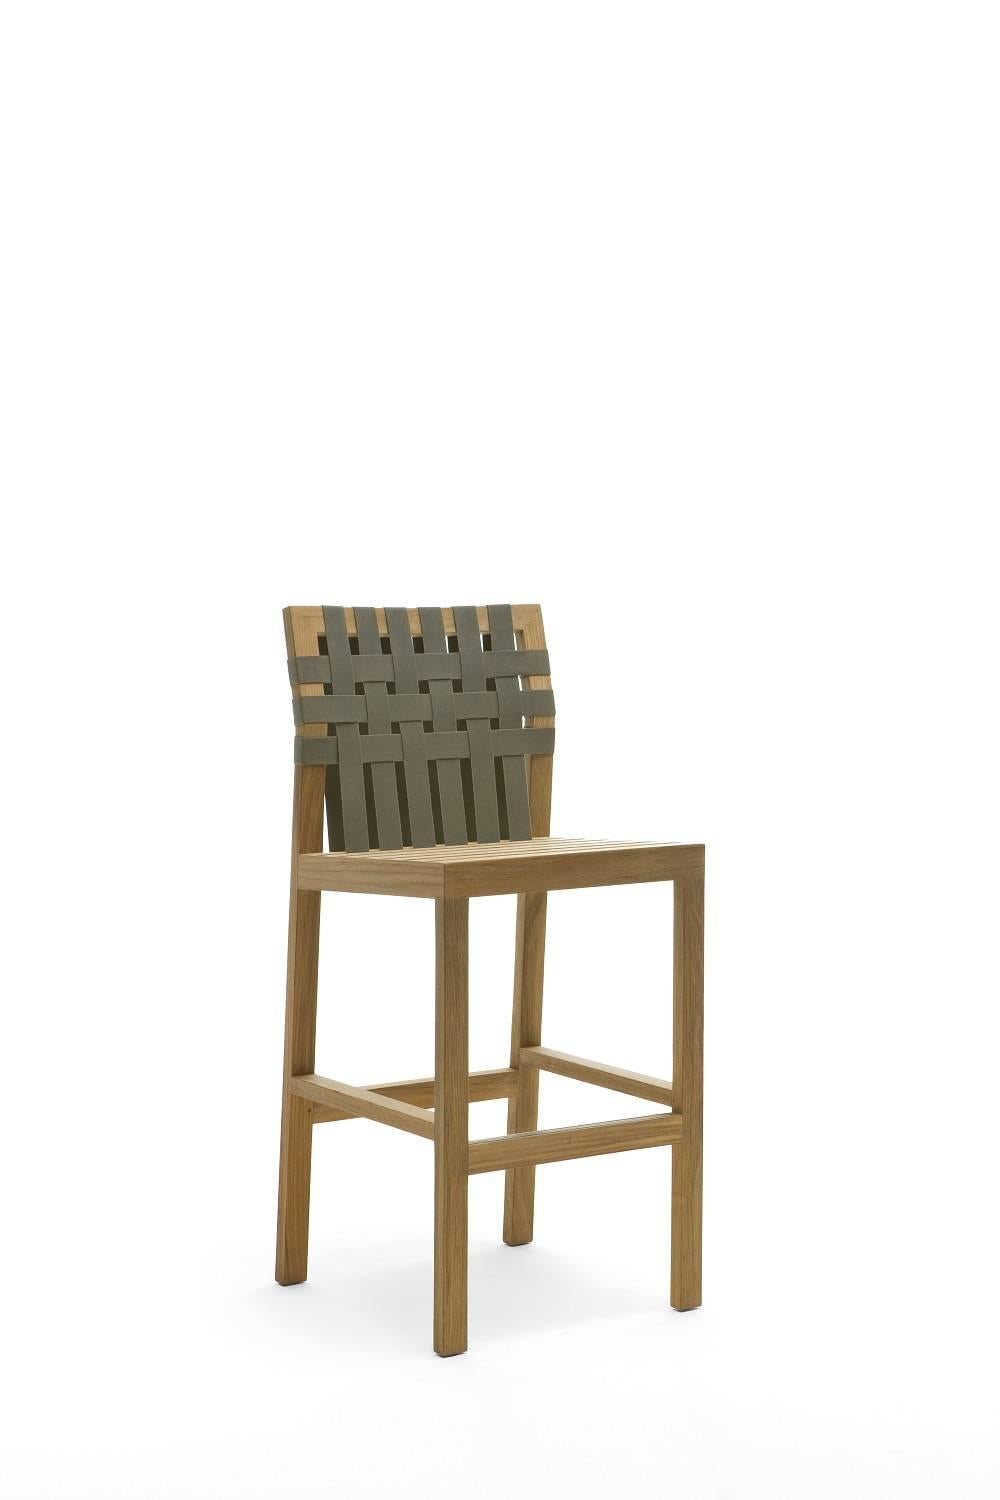 Roda Network 150 barstool. Made from solid teak with grey polyester belt details. Designed by Rodolfo Dordoni. For outdoor use.